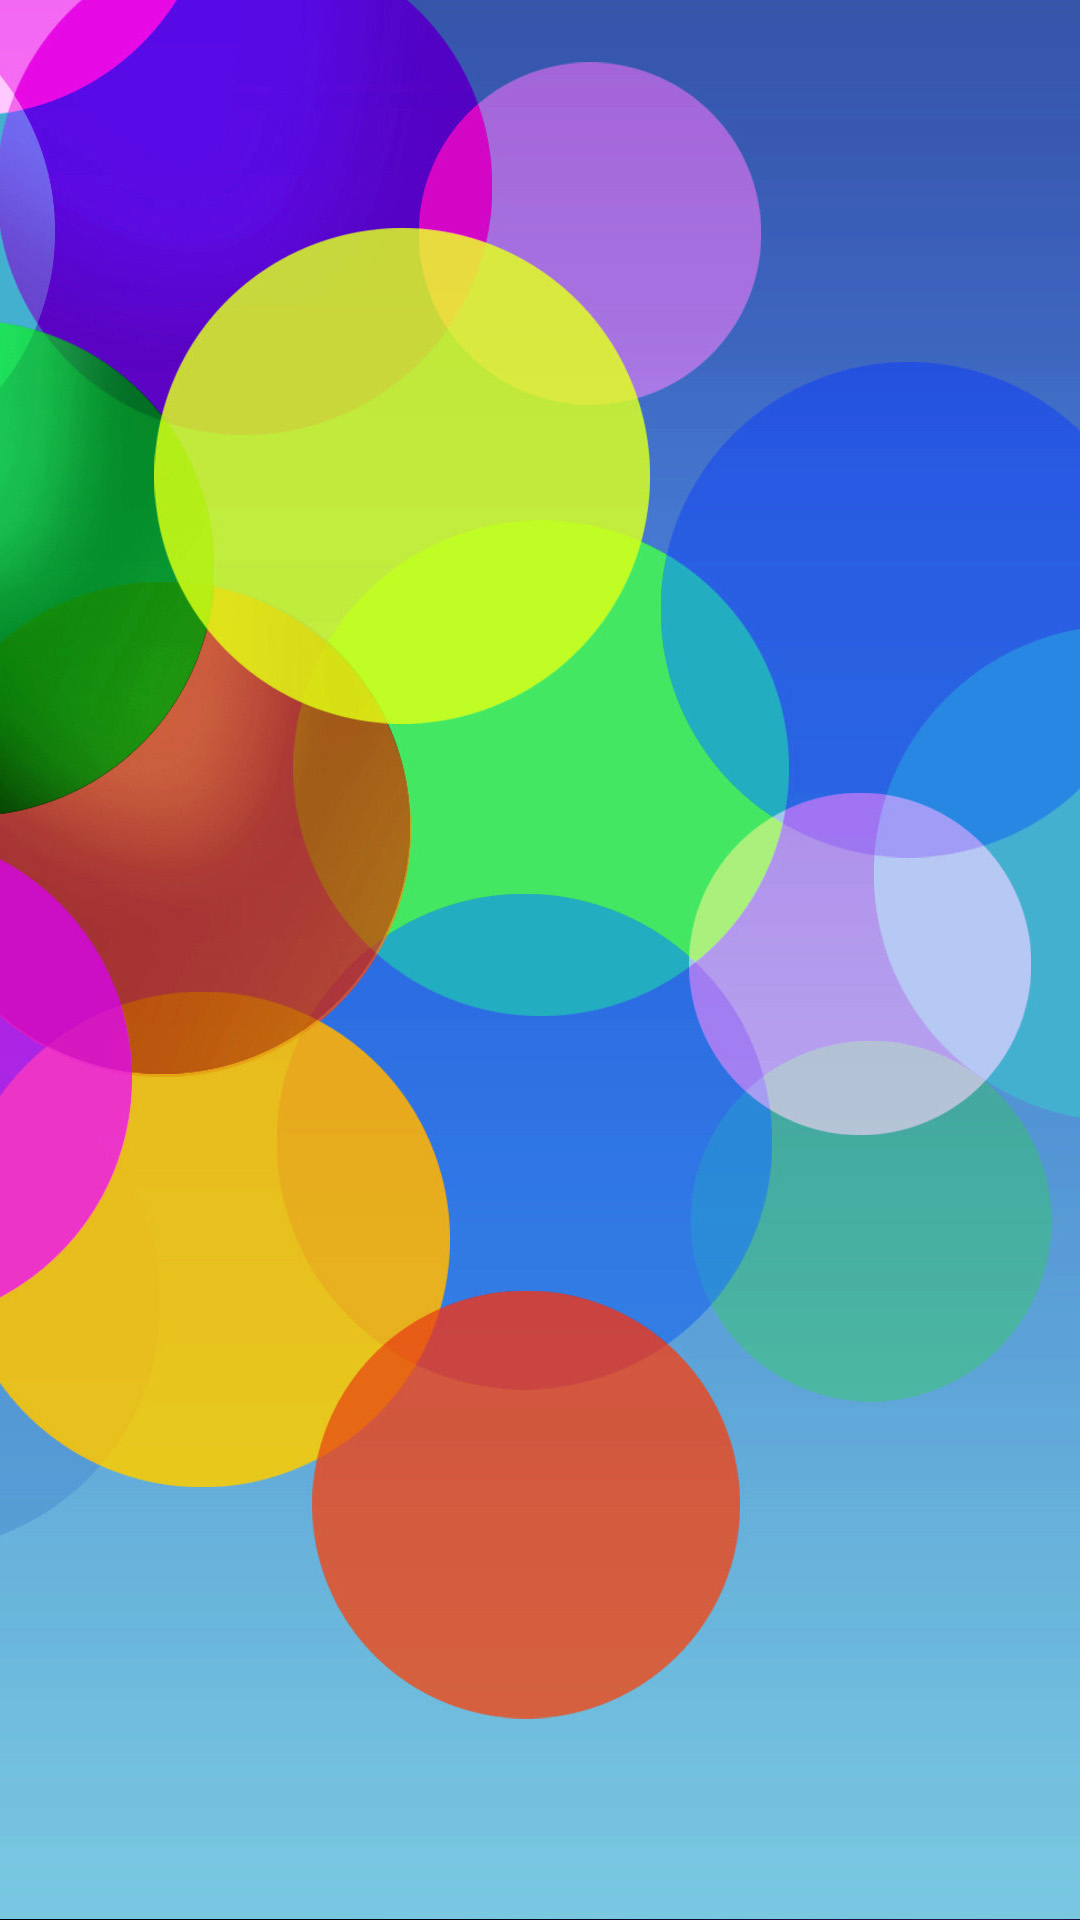 Colorful Minimal Circles Bubbles Android Wallpaper free download